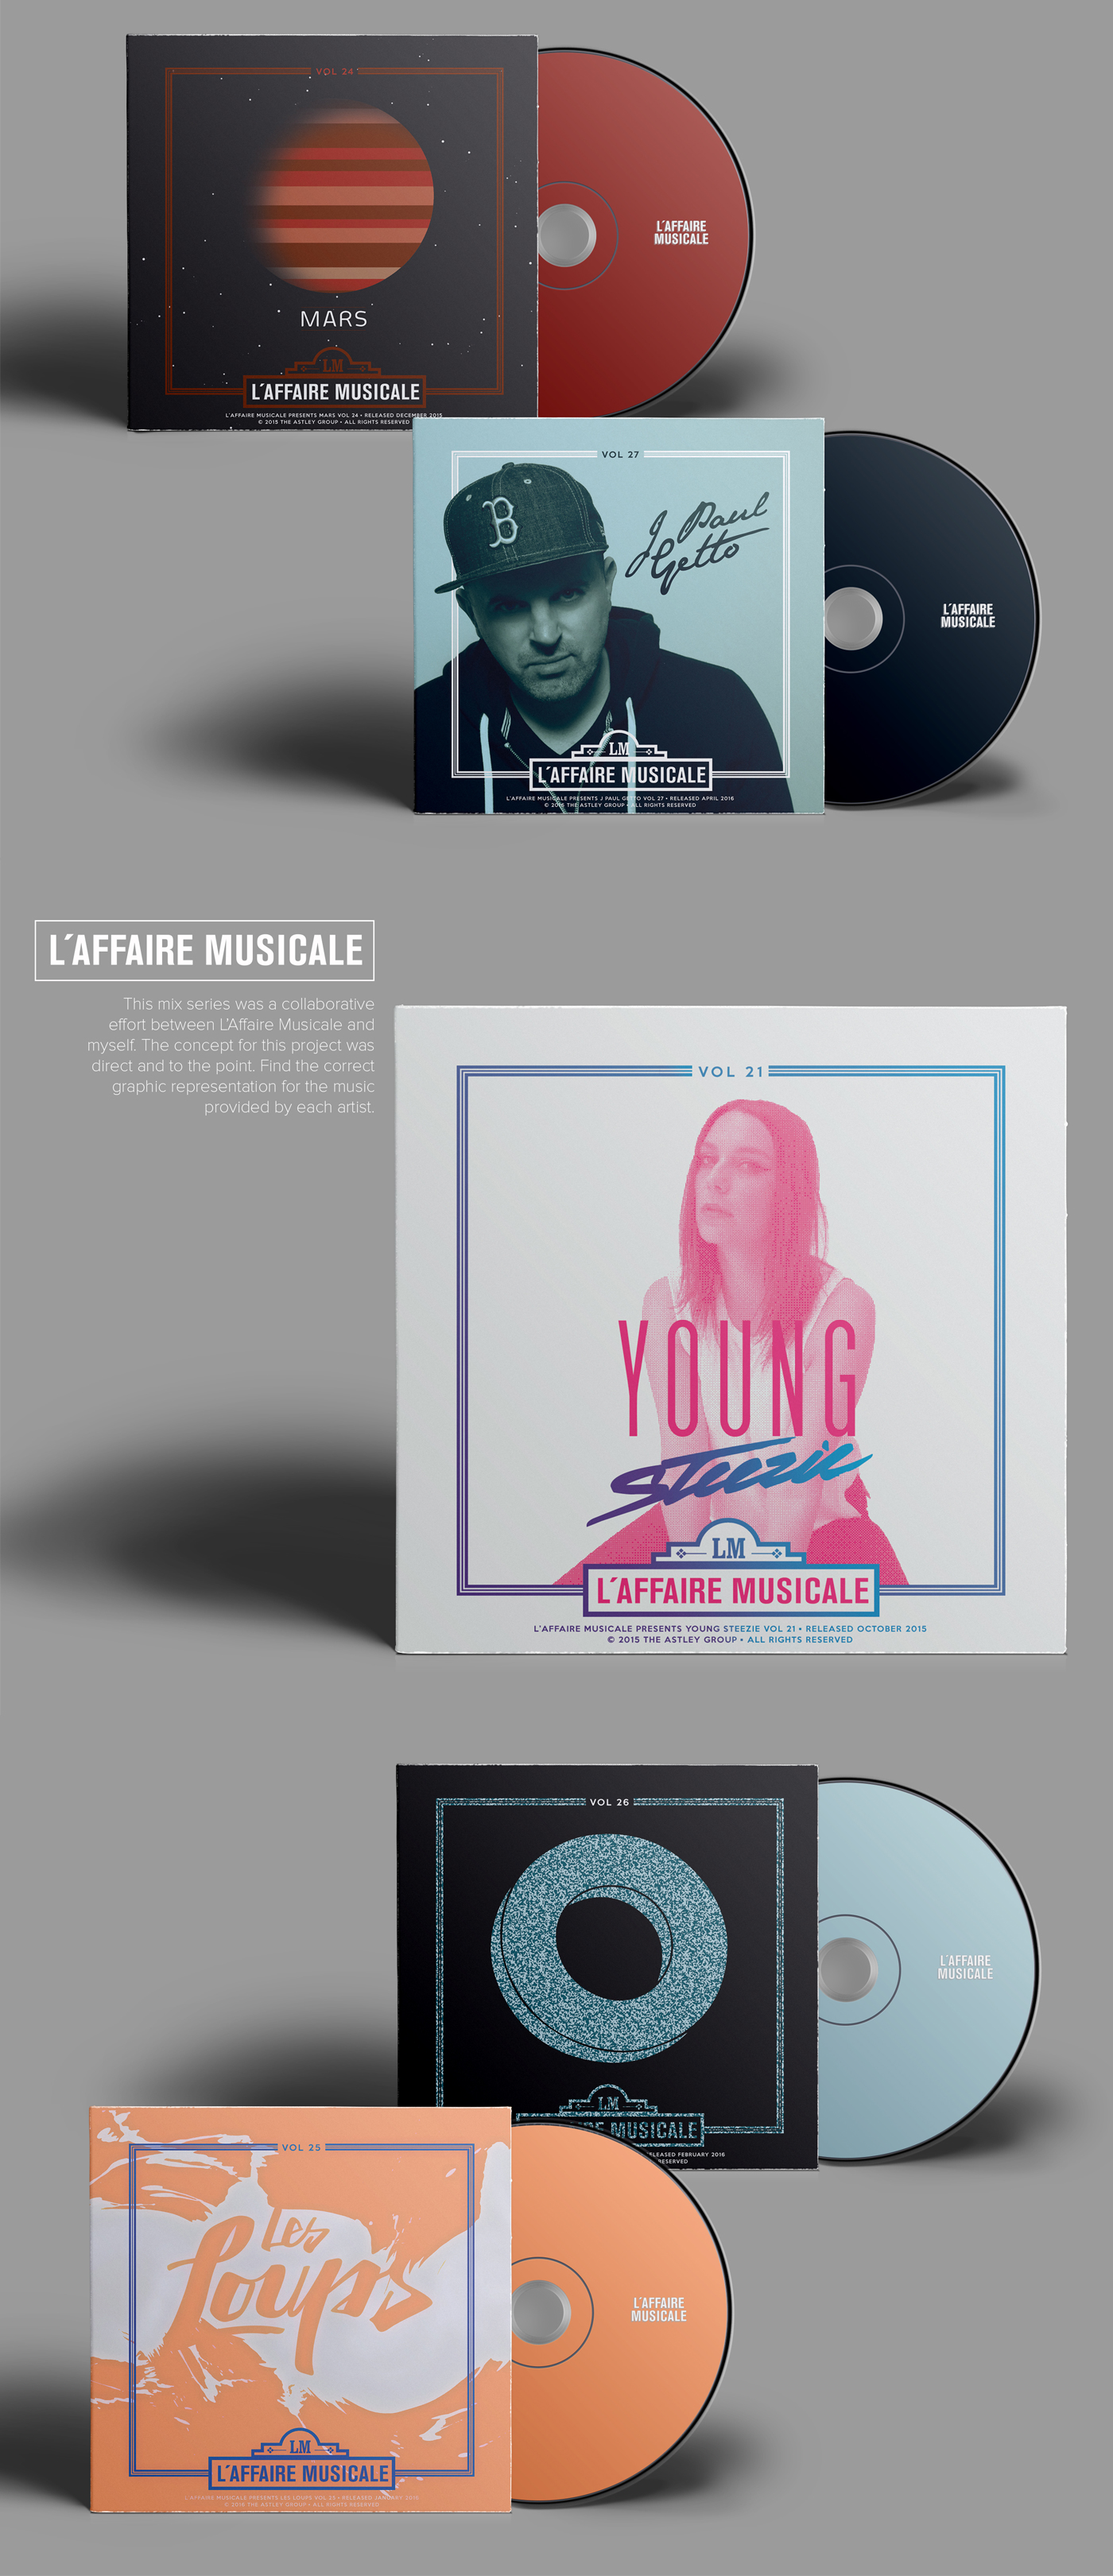 L'Affaire Musicale CD Packaging on Behance